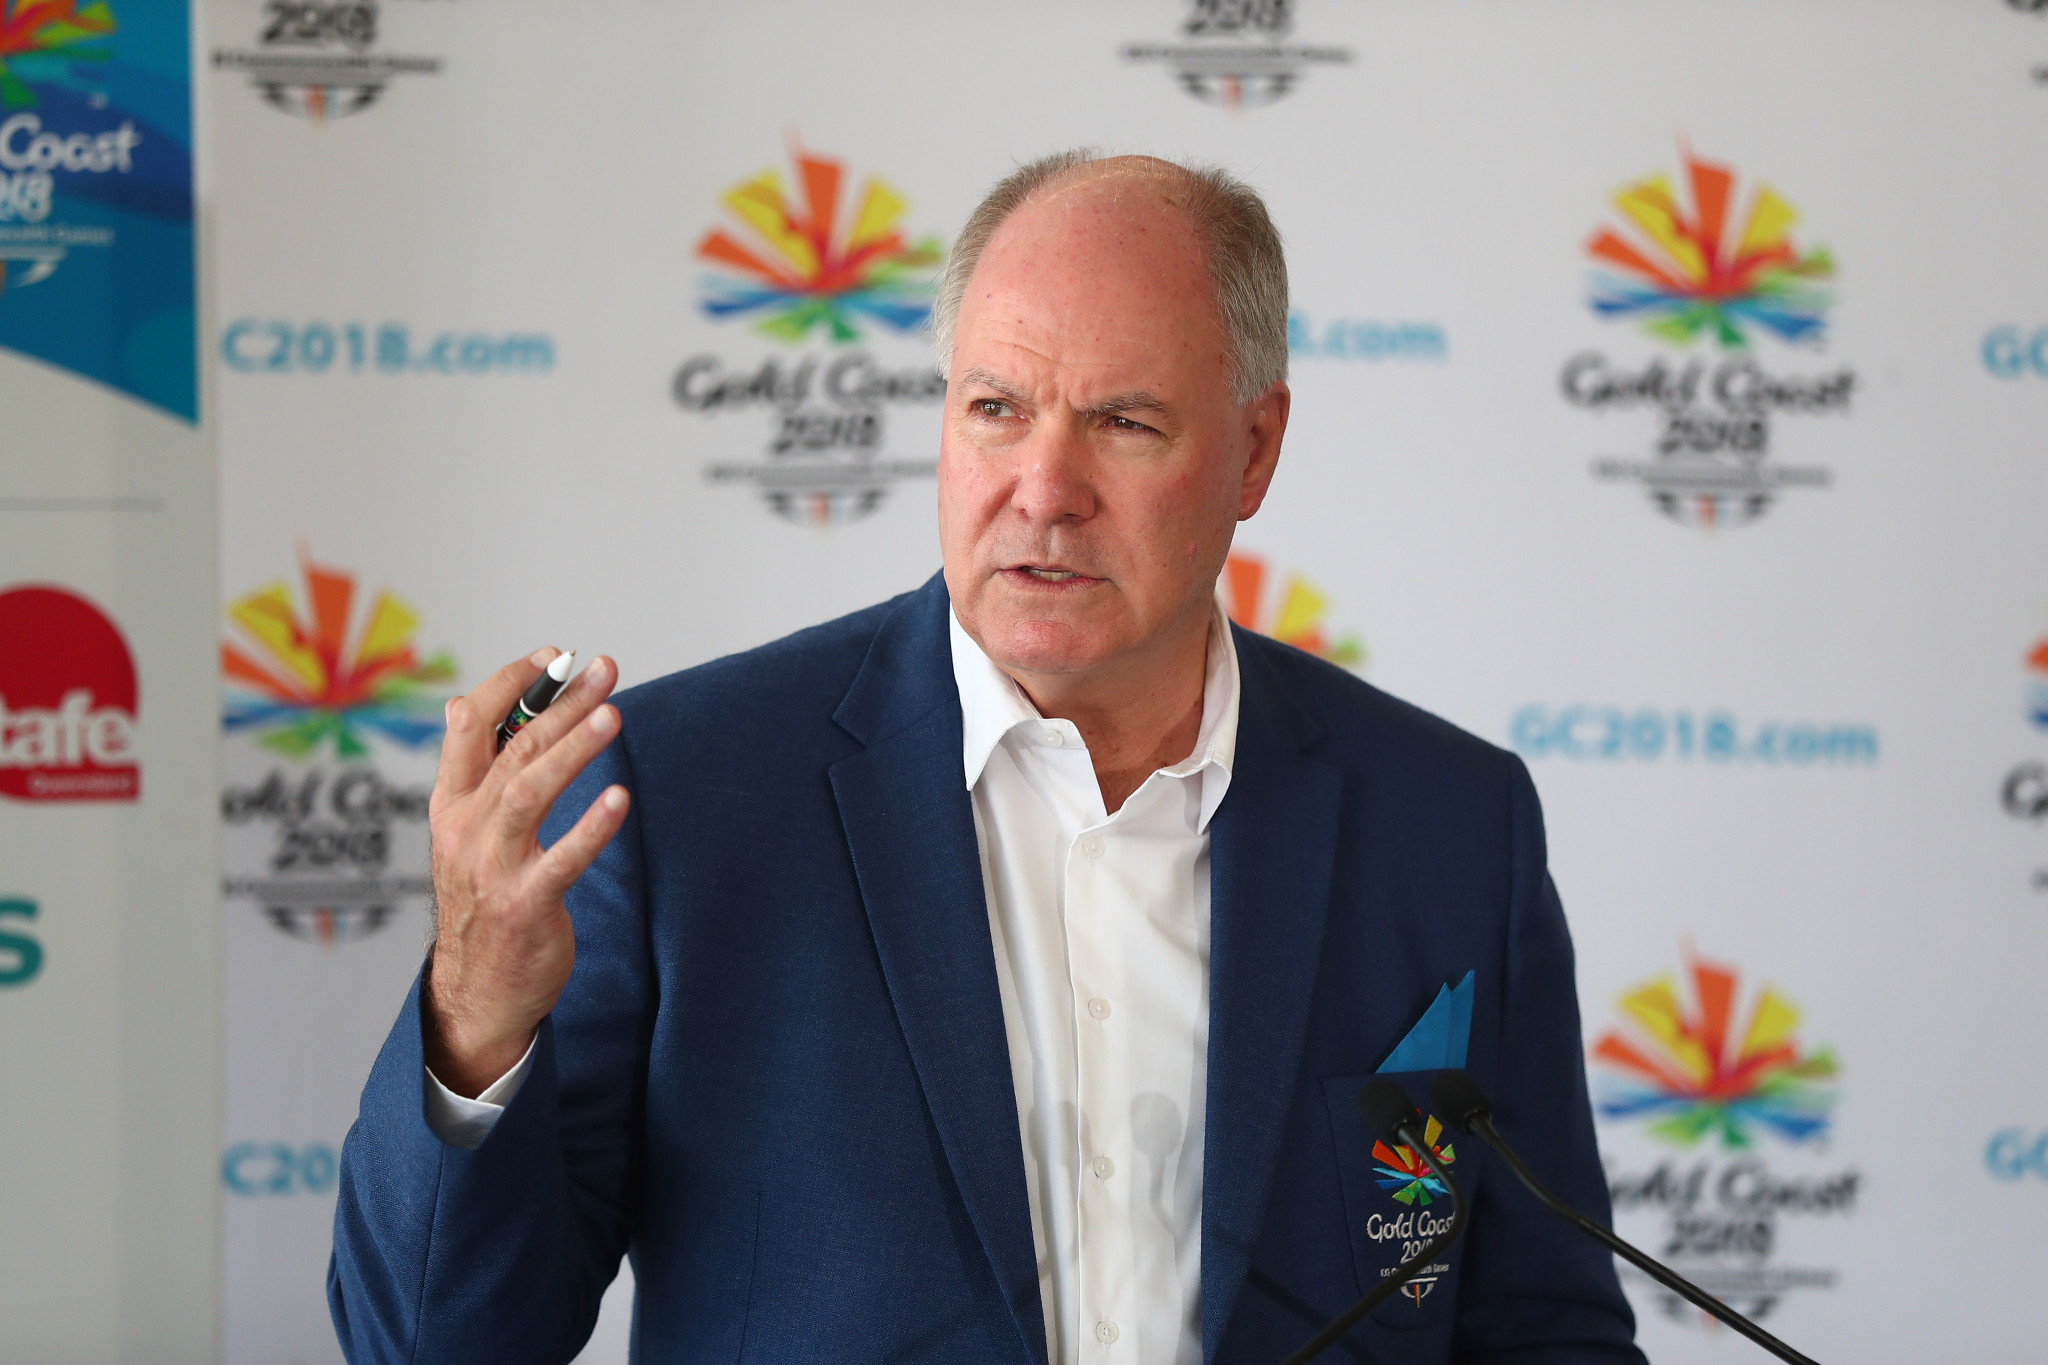 Gold Coast 2018 chief executive Mark Peters was on the Australian list ©Getty Images